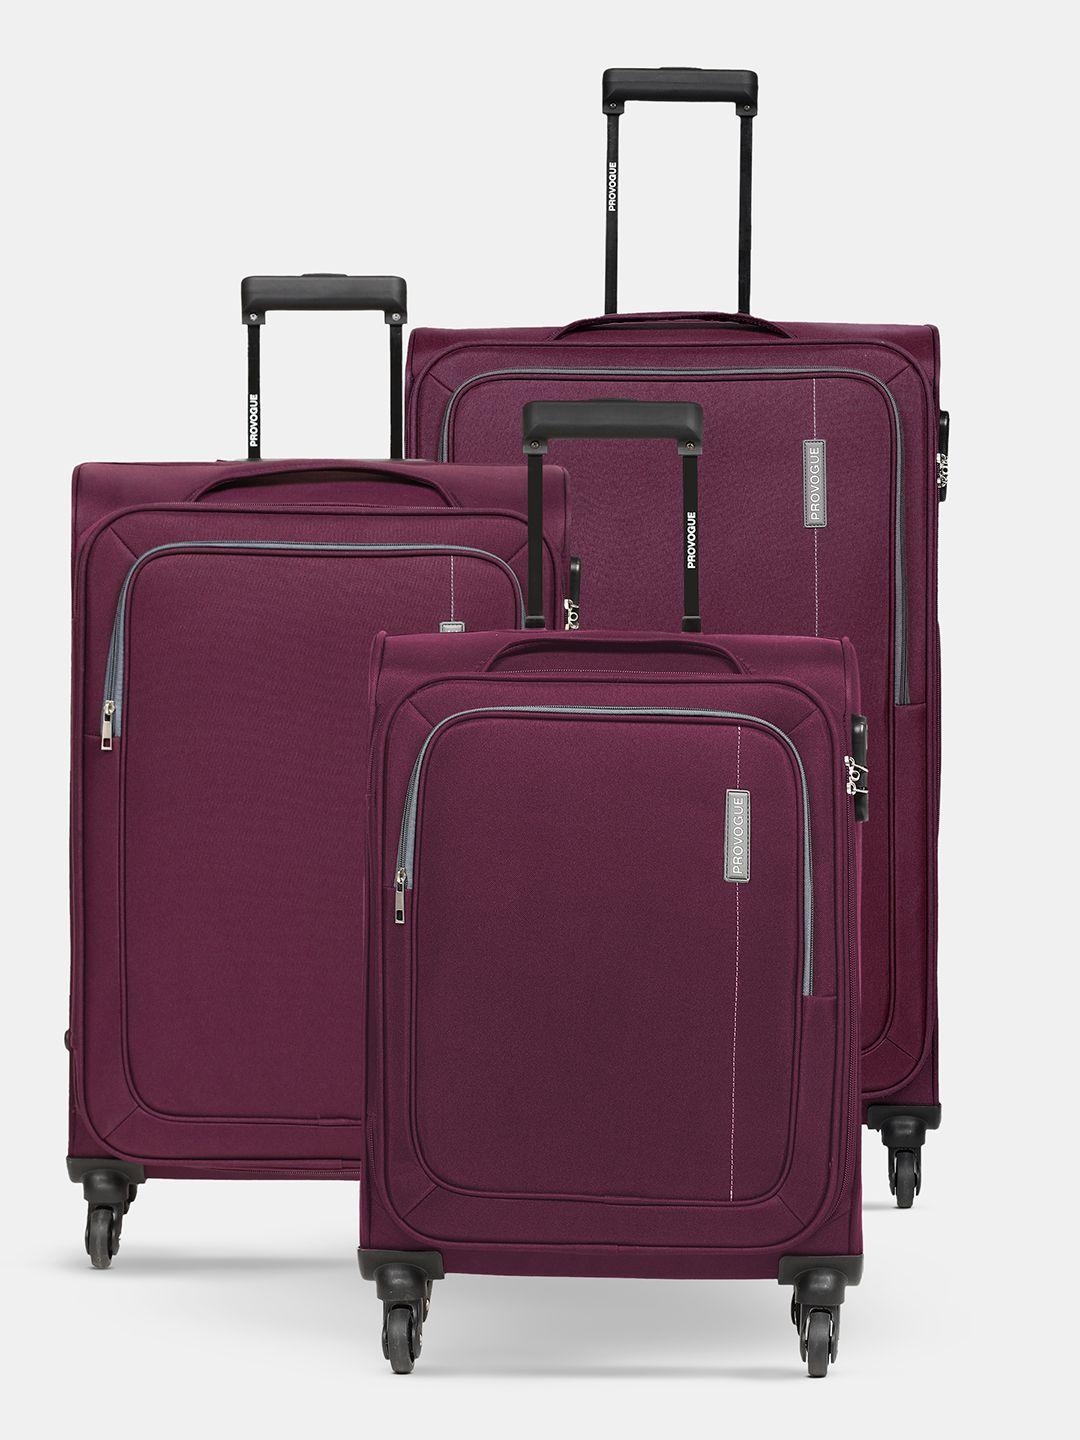 provogue soft body set of 3 lead small, medium & large size trolley suitcases